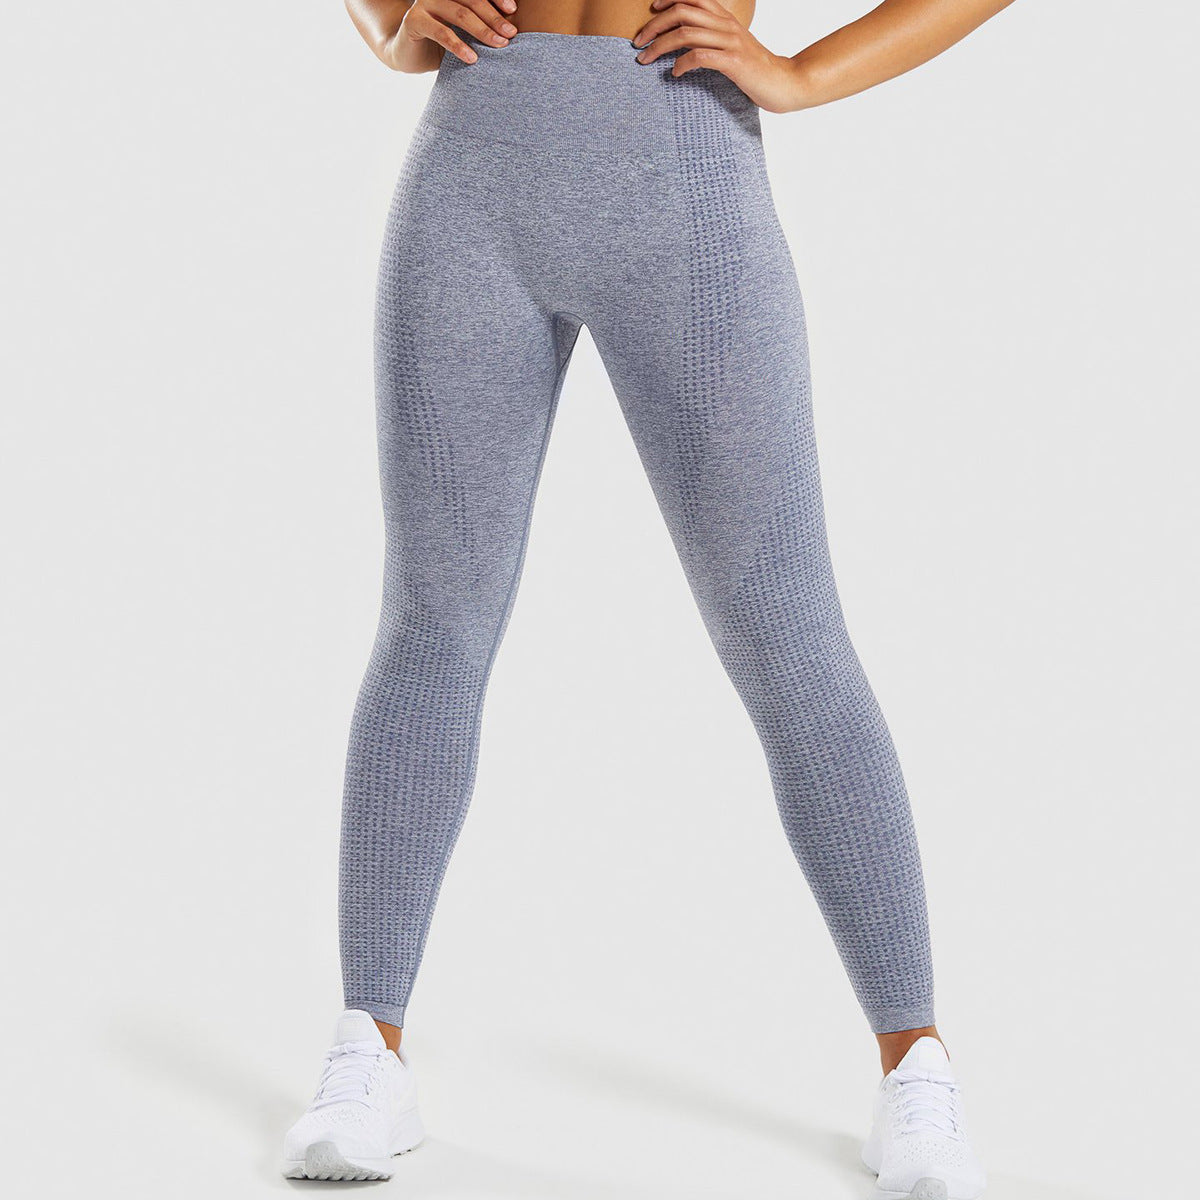 Quick-drying Sports Tights Fitness Leggings